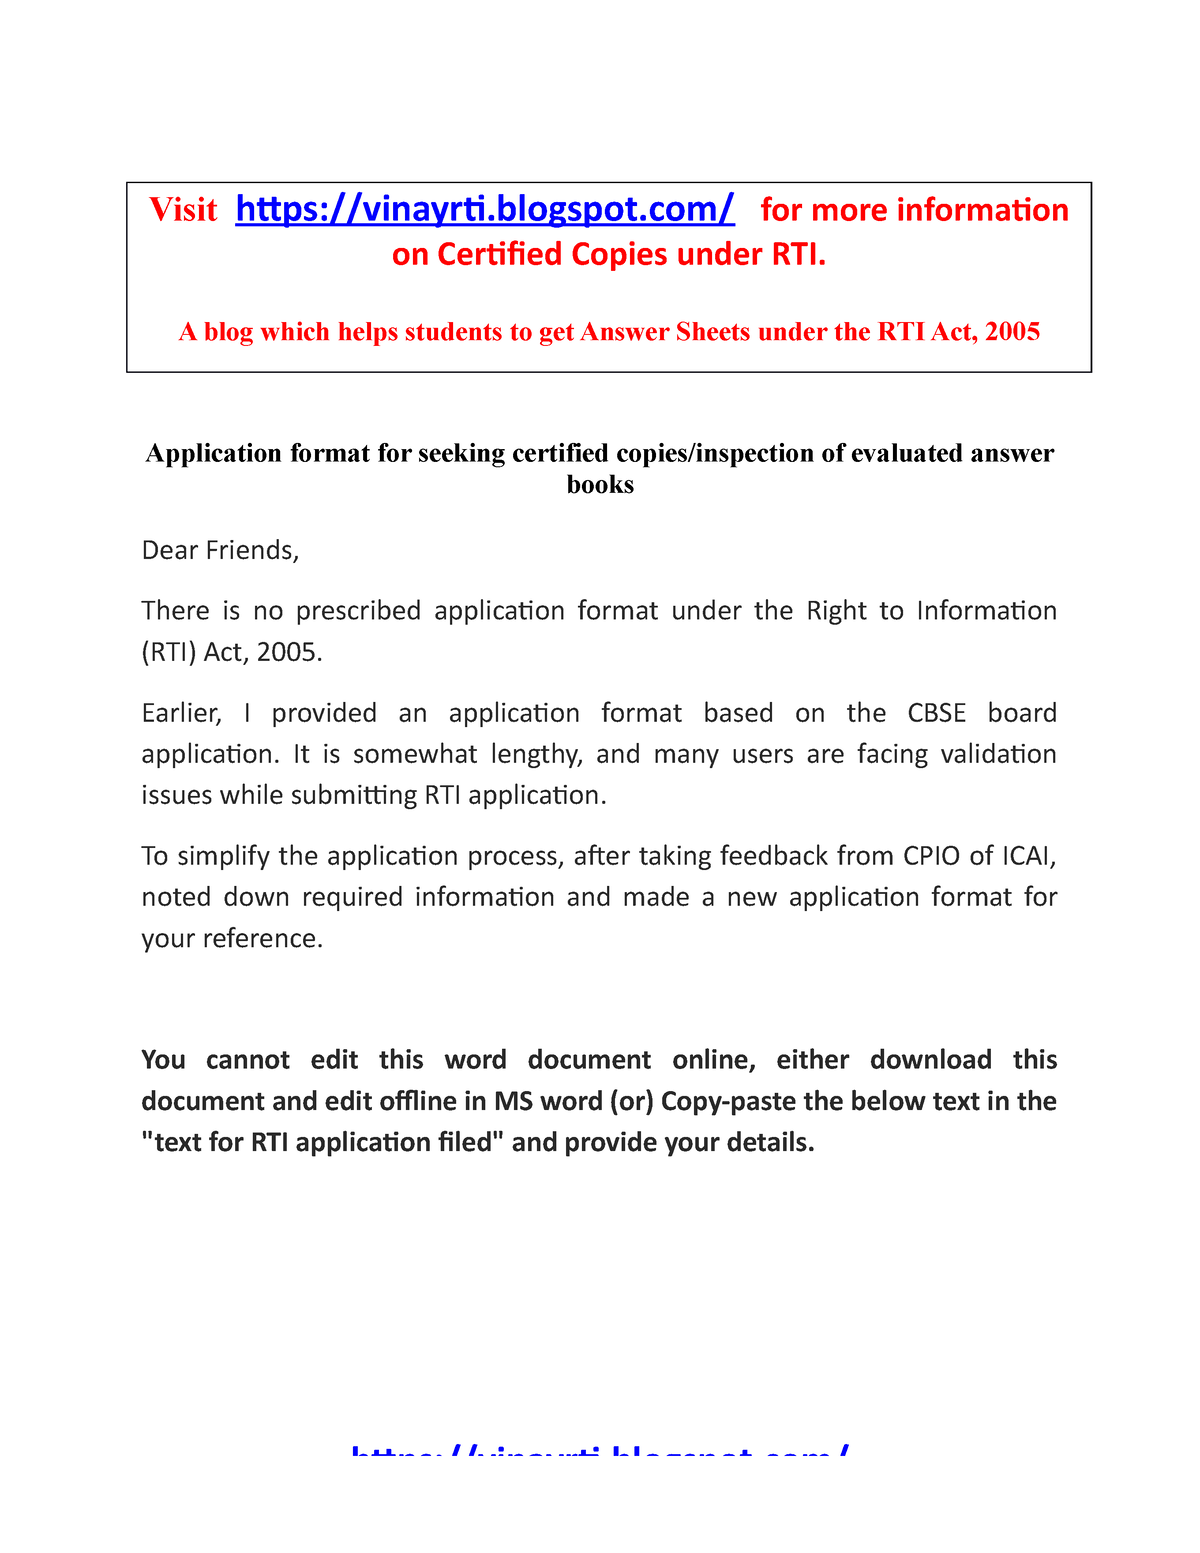 application-format-for-certified-copies-visit-vinayrti-blogspot-for